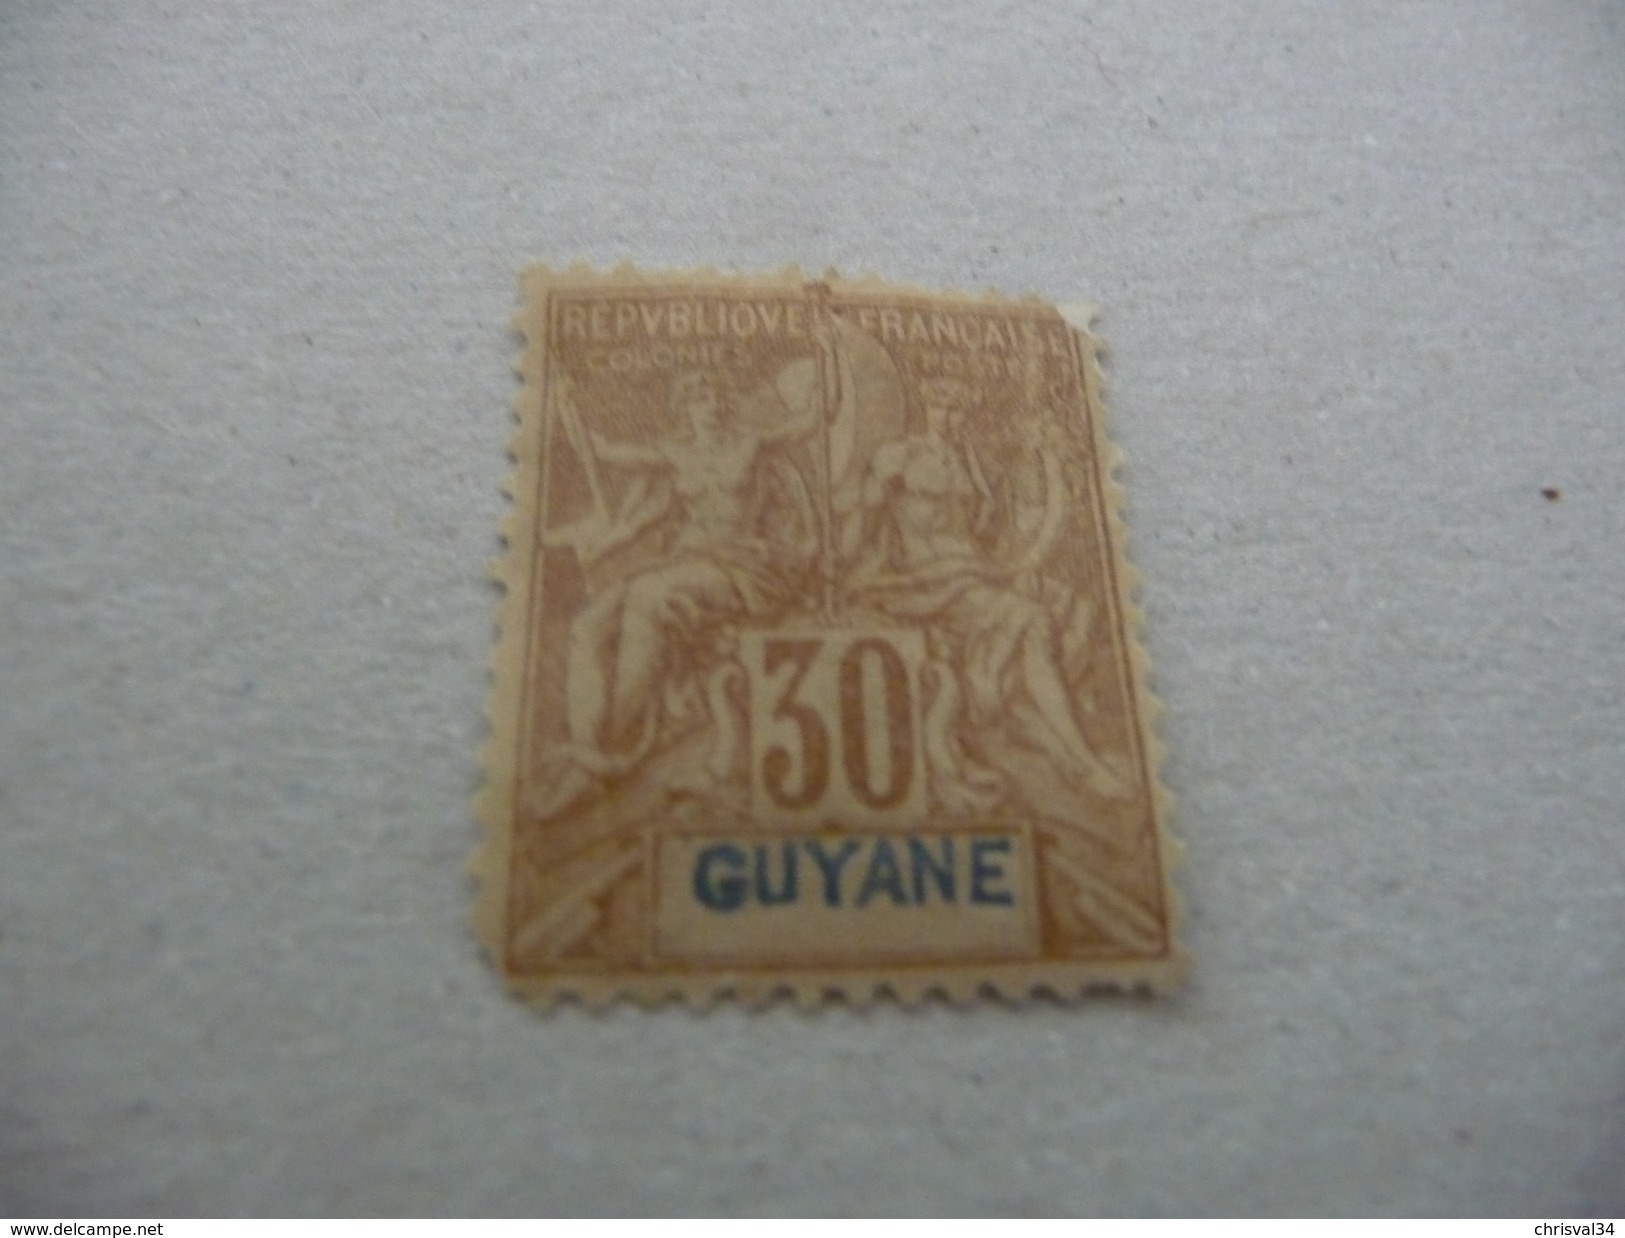 TIMBRE   GUYANE      N  38     COTE  20,00  EUROS    OBLITERE - Used Stamps